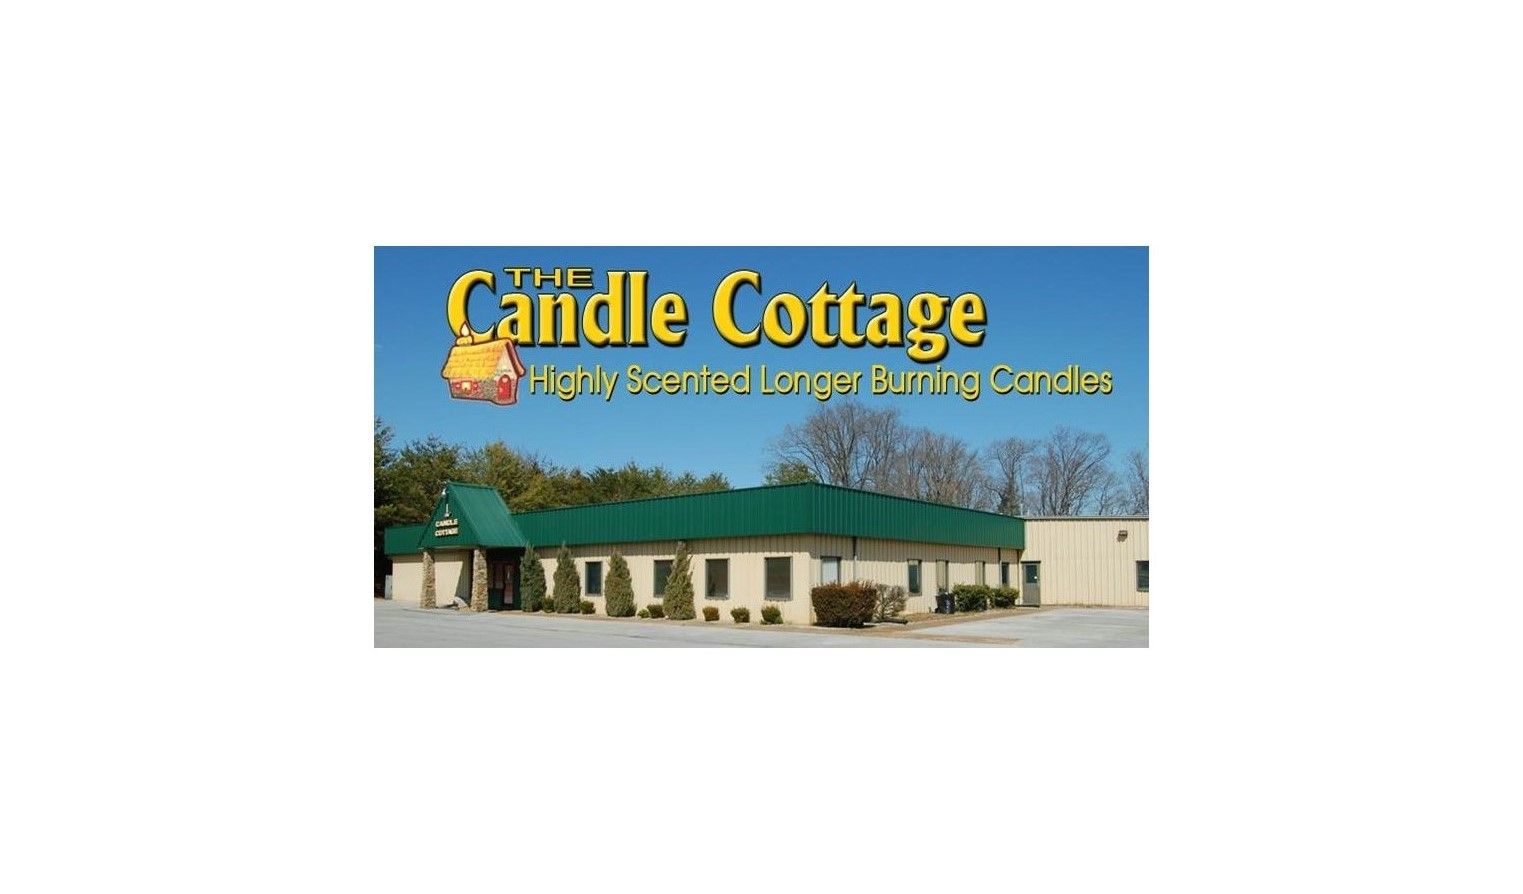 America's Country Jar Candle - The Candle Cottage